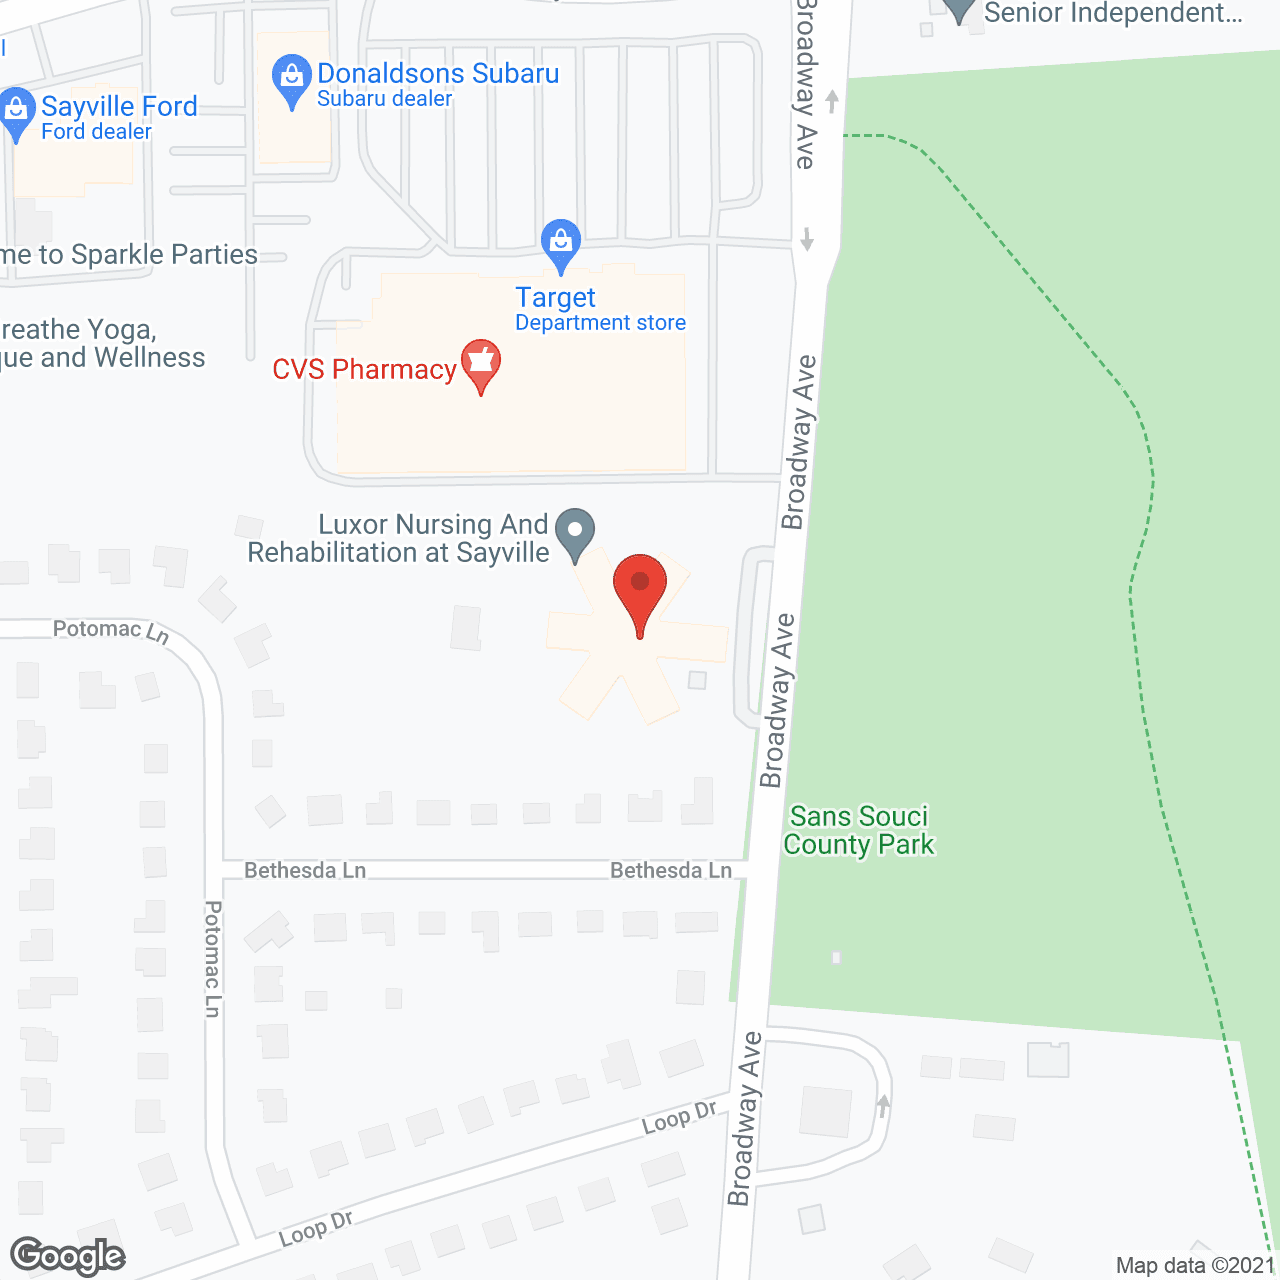 Luxor Nursing and Rehabilitation at Sayville in google map